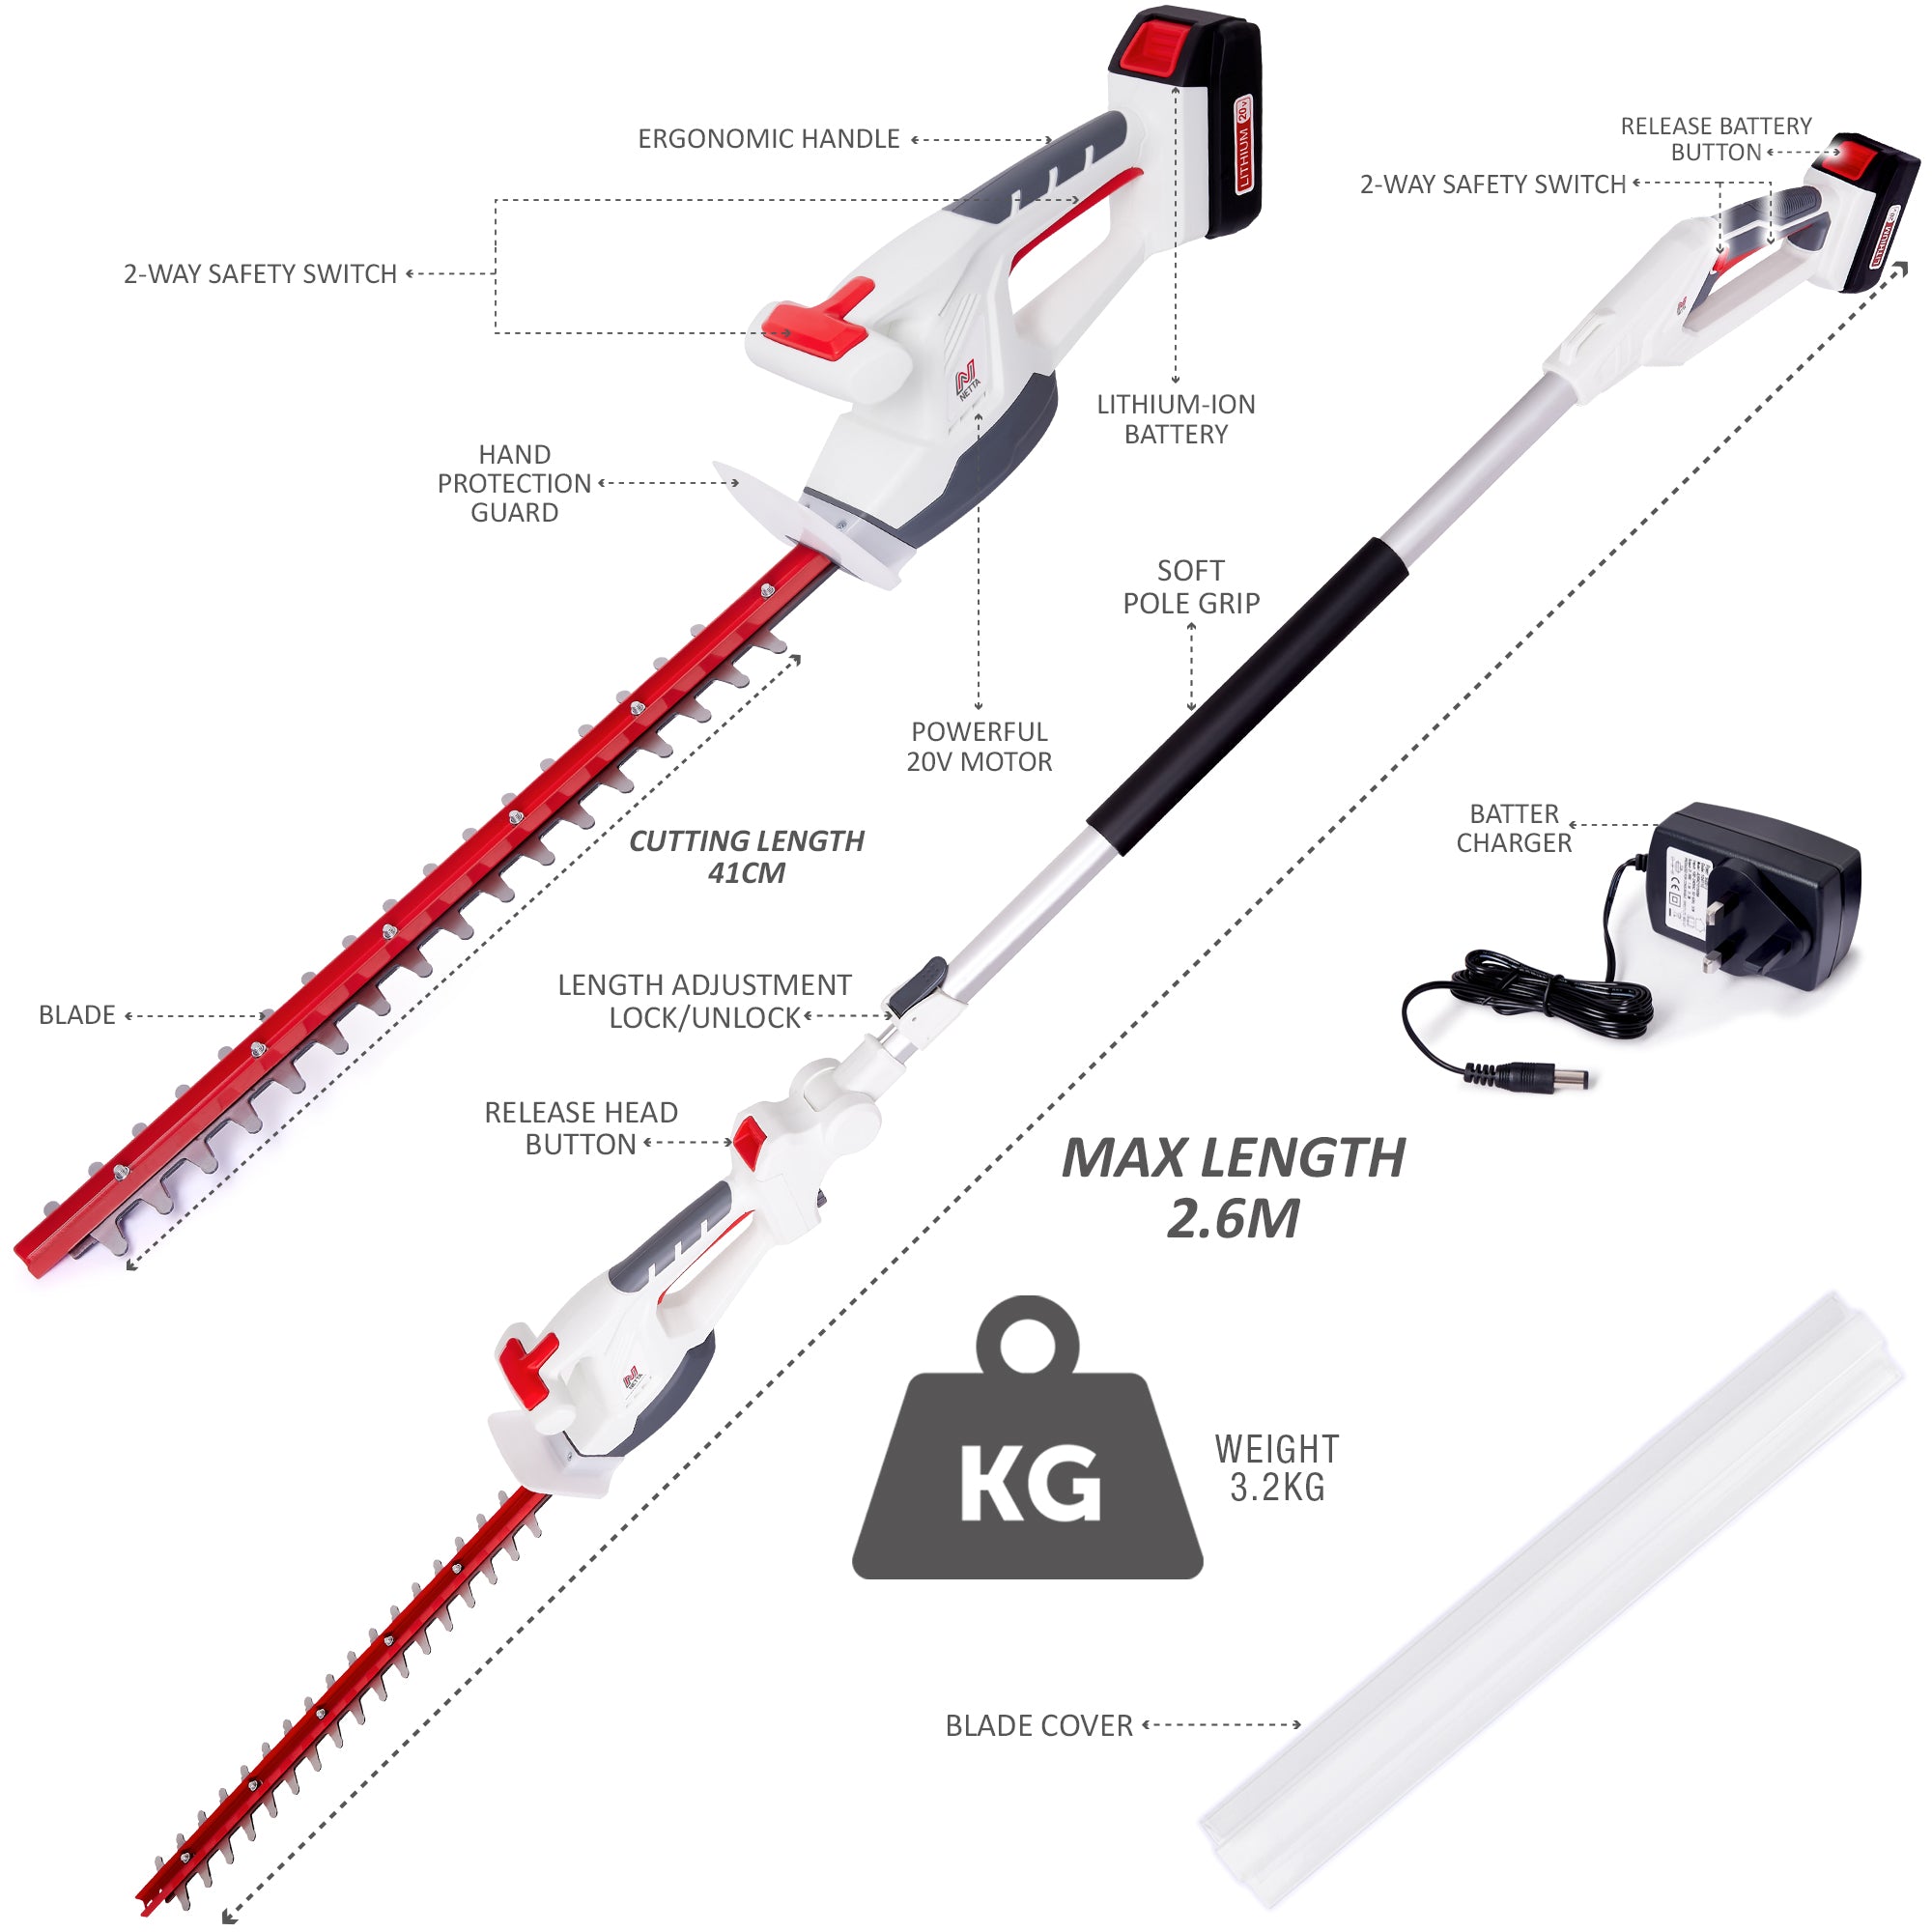 NETTA 20V Cordless 4-In-1 Pole & Handheld Hedge Trimmer and Chainsaw